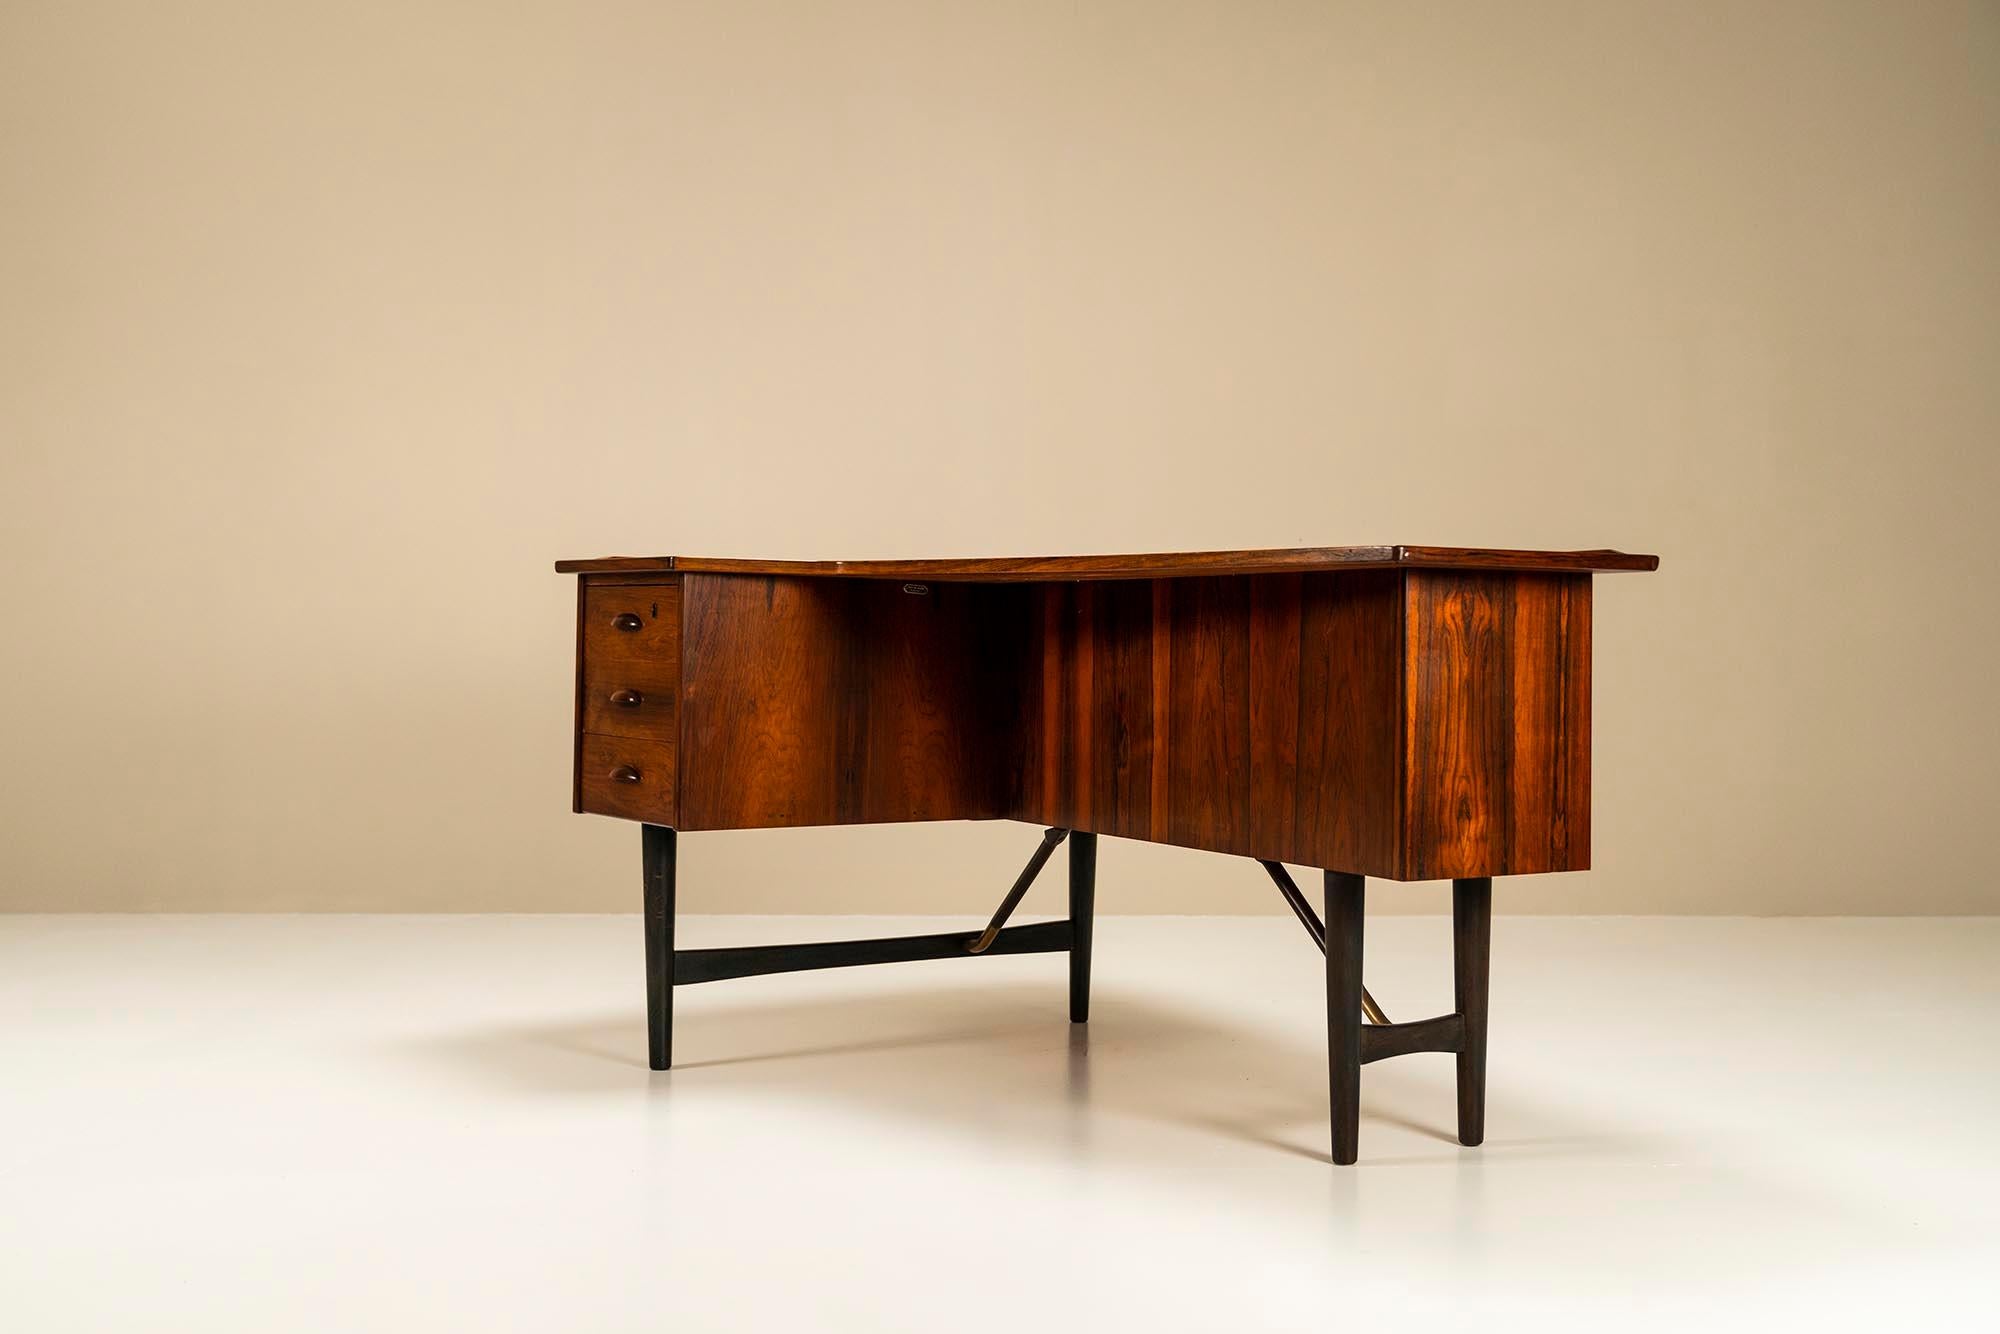 The Peter Løvig Nielsen boomerang desk in rosewood is an exemplary piece of mid-century Danish design. With its stunning patina and wood drawing, the desk is a testament to the quality and craftsmanship of the era. It is made from rosewood, a